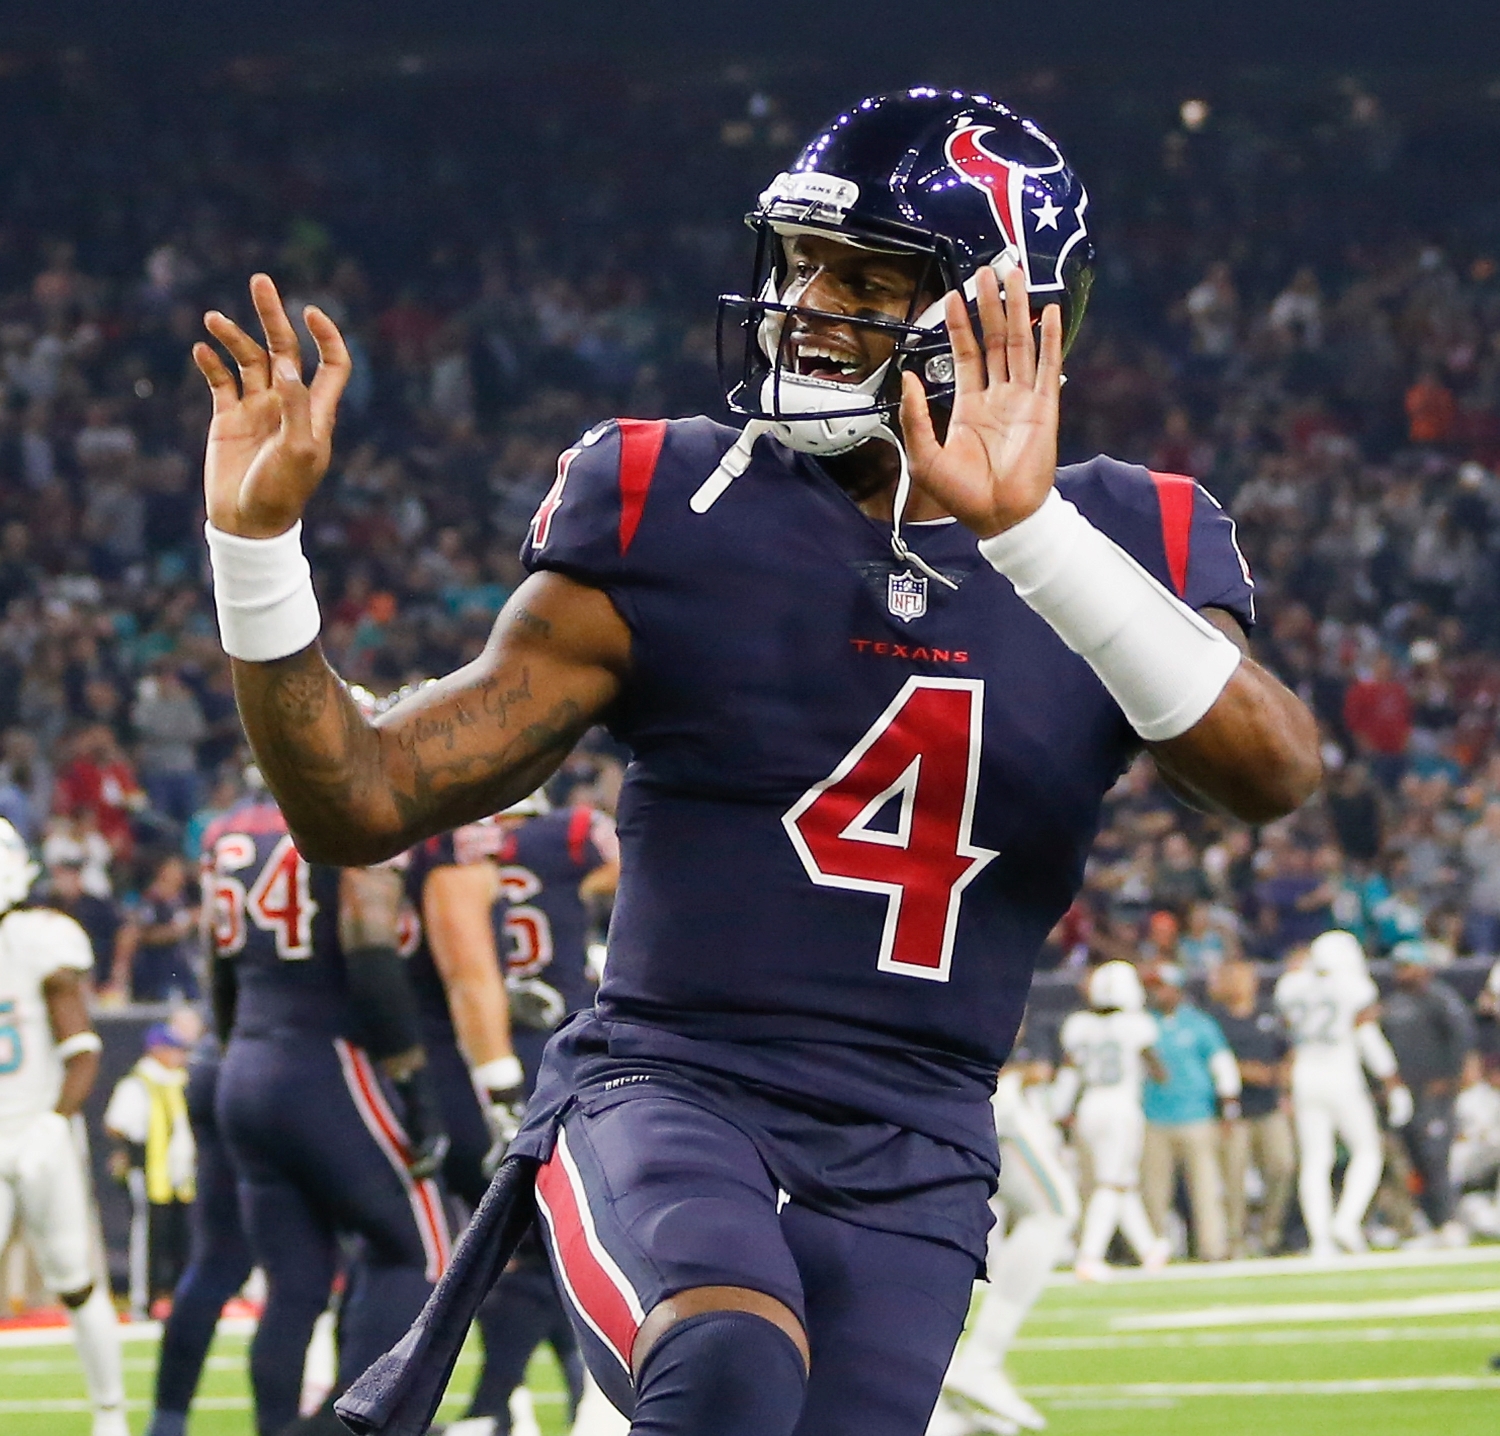 Deshaun Watson of the Houston Texans points to the crowd after Lamar Miller scored a touchdown against the Miami Dolphins at NRG Stadium.